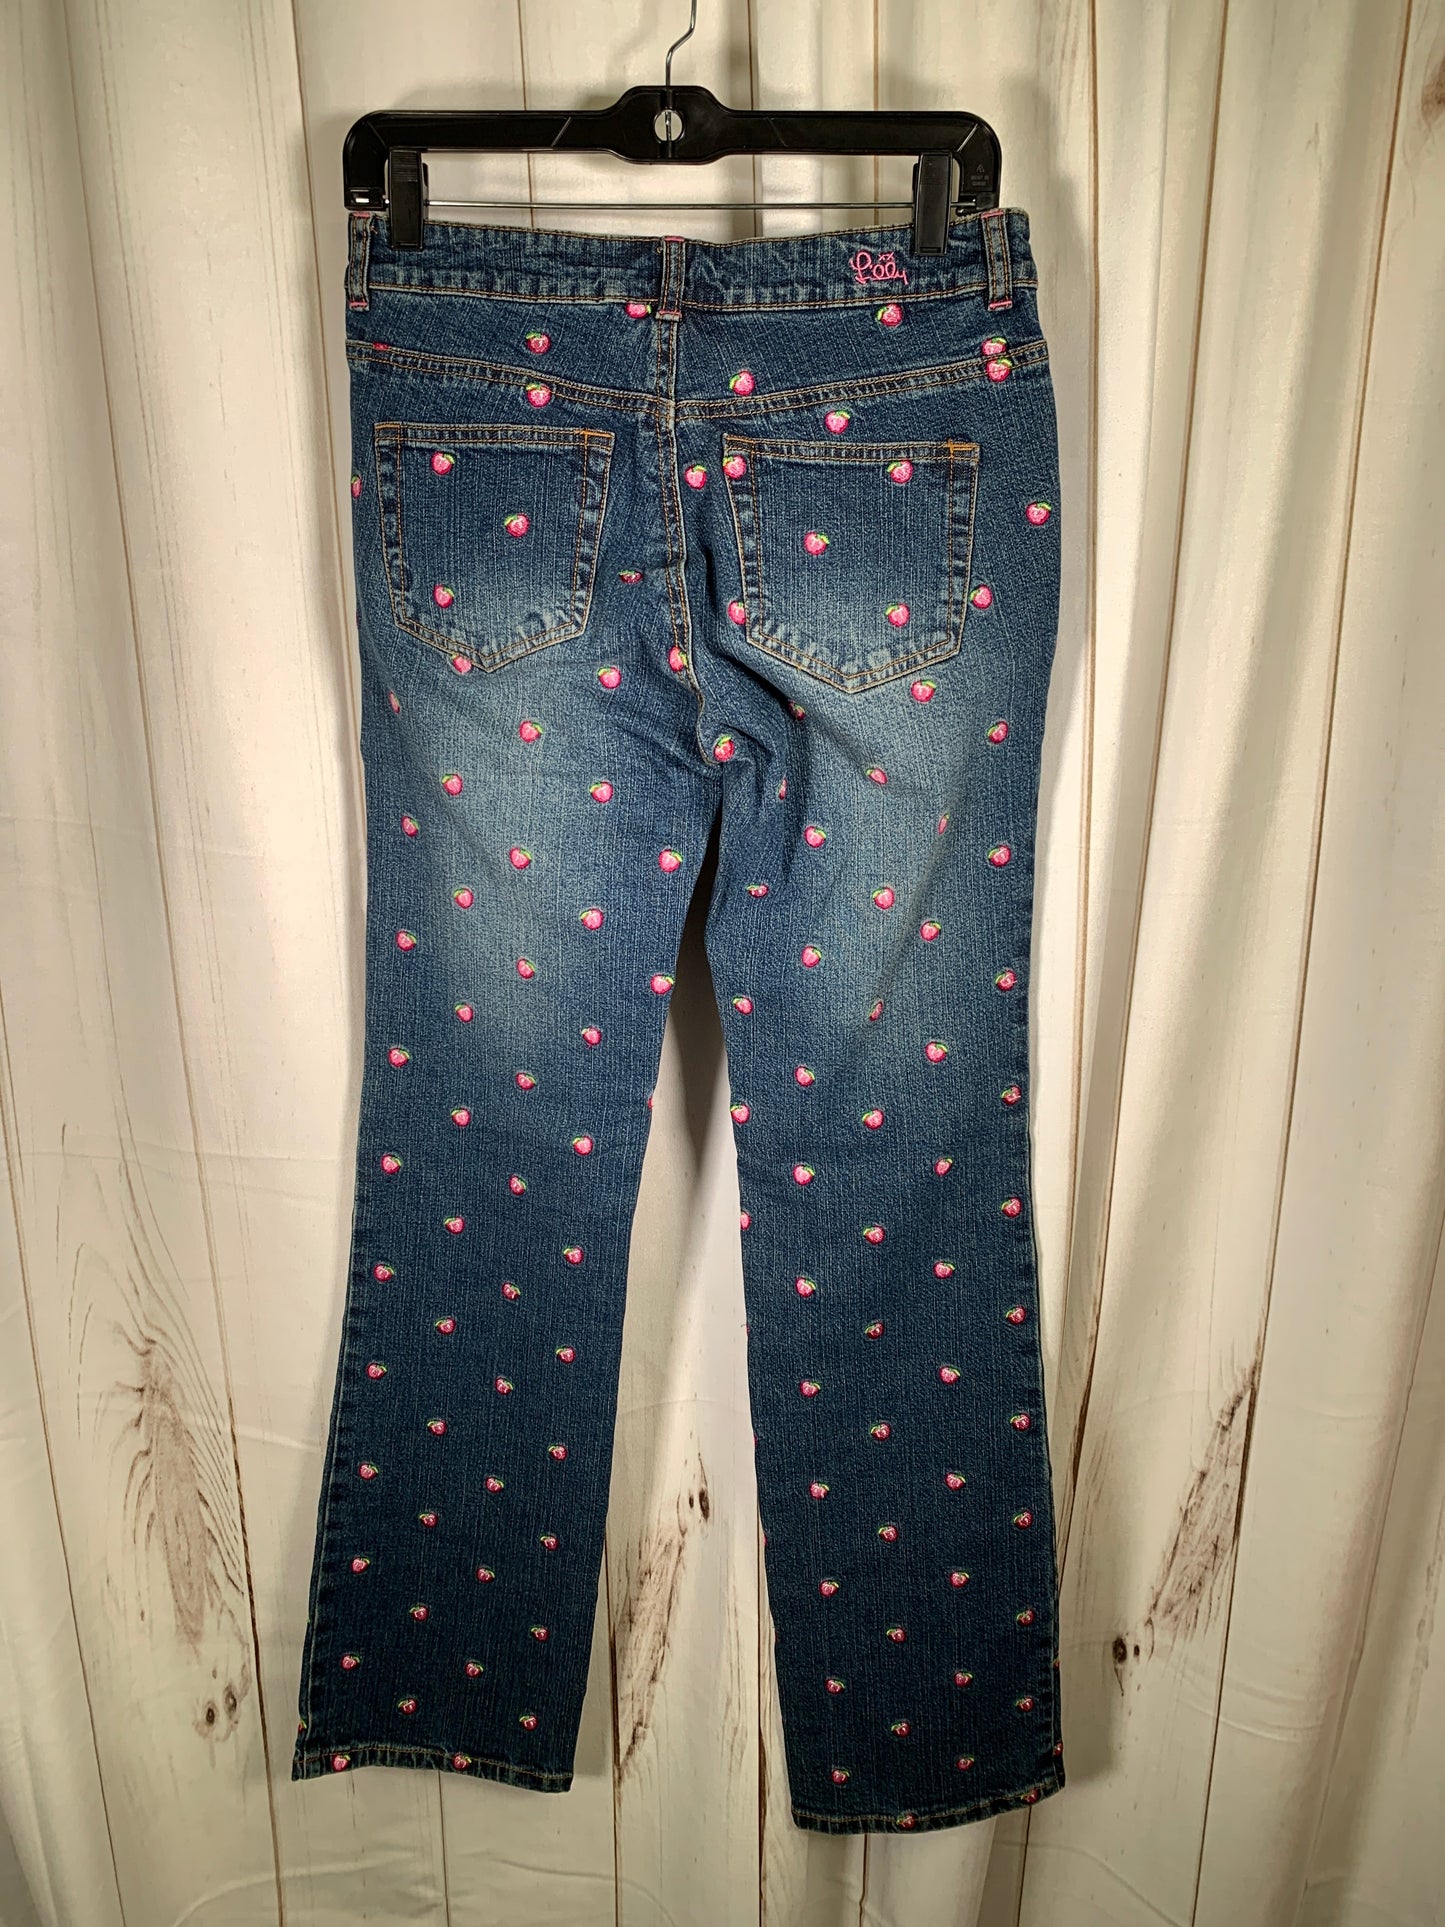 Jeans Designer By Lilly Pulitzer  Size: 4